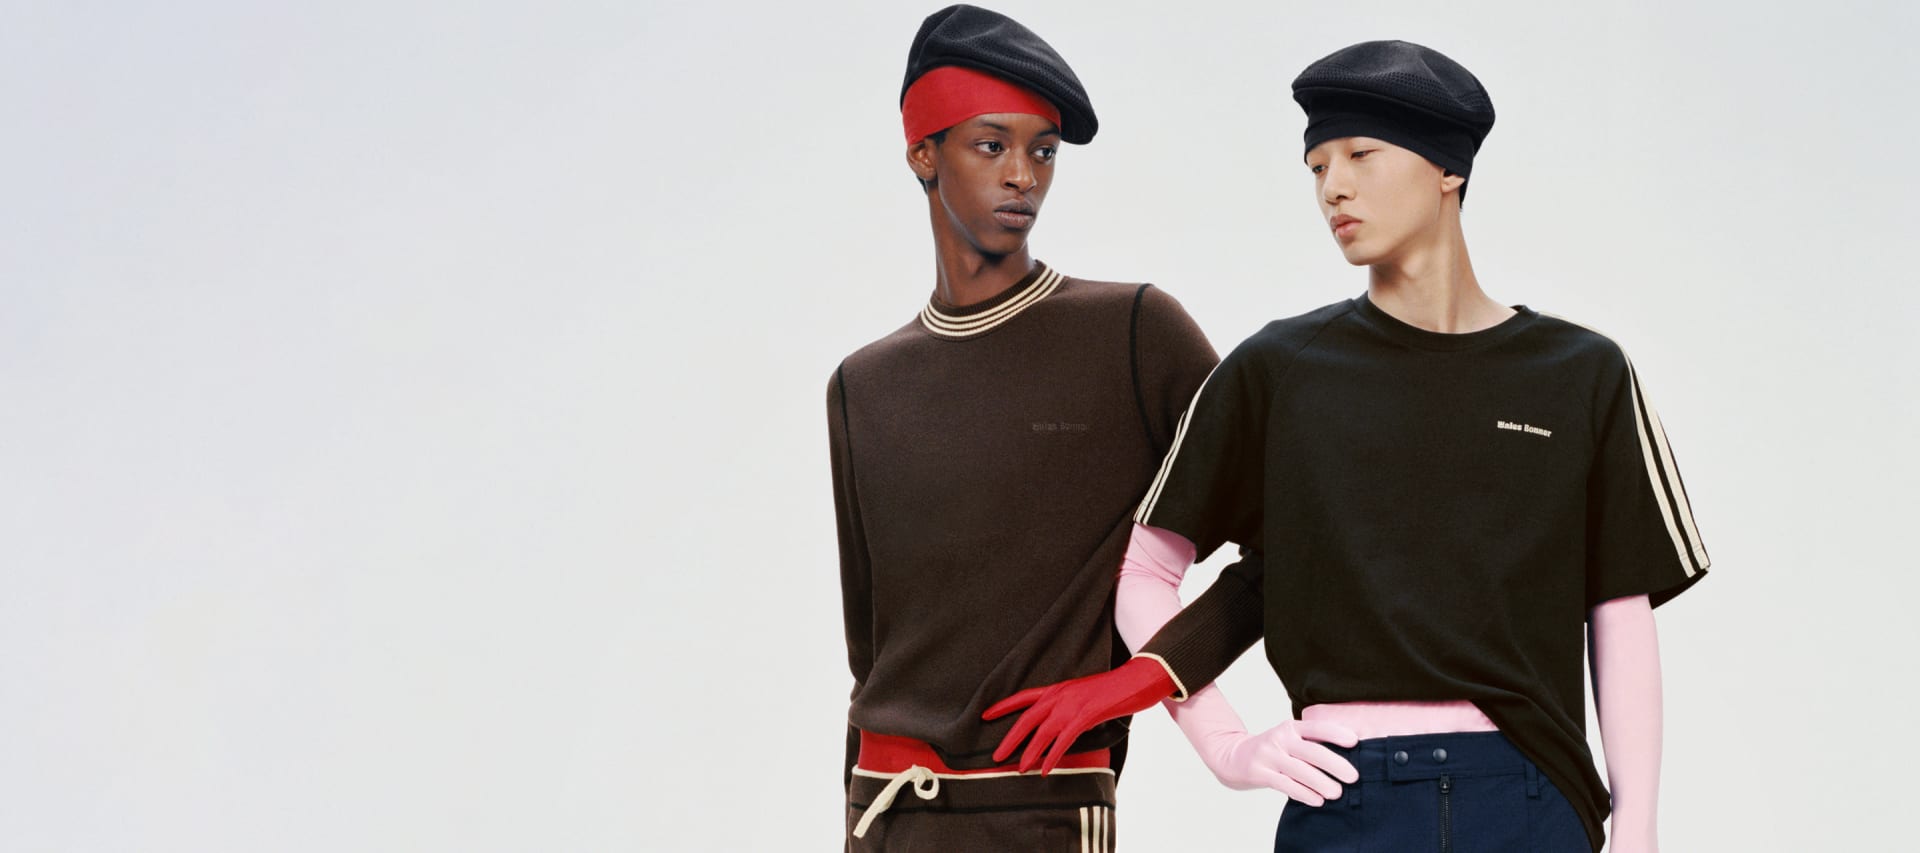 Two models are posing with their arms interlocked against a grey background, wearing apparel from the adidas Originals by Wales Bonner collection.